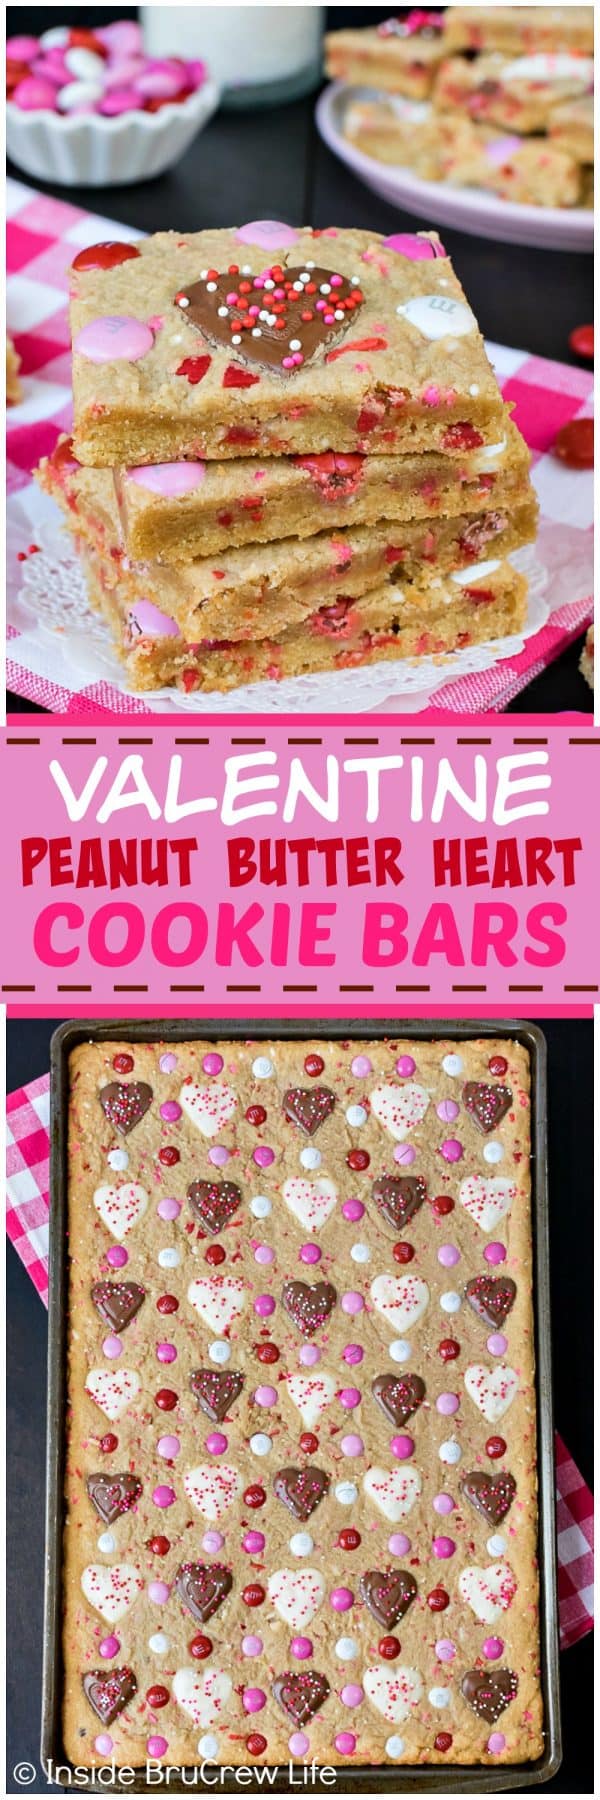 2 pictures of peanut butter cookie bars separated by a pink text box.